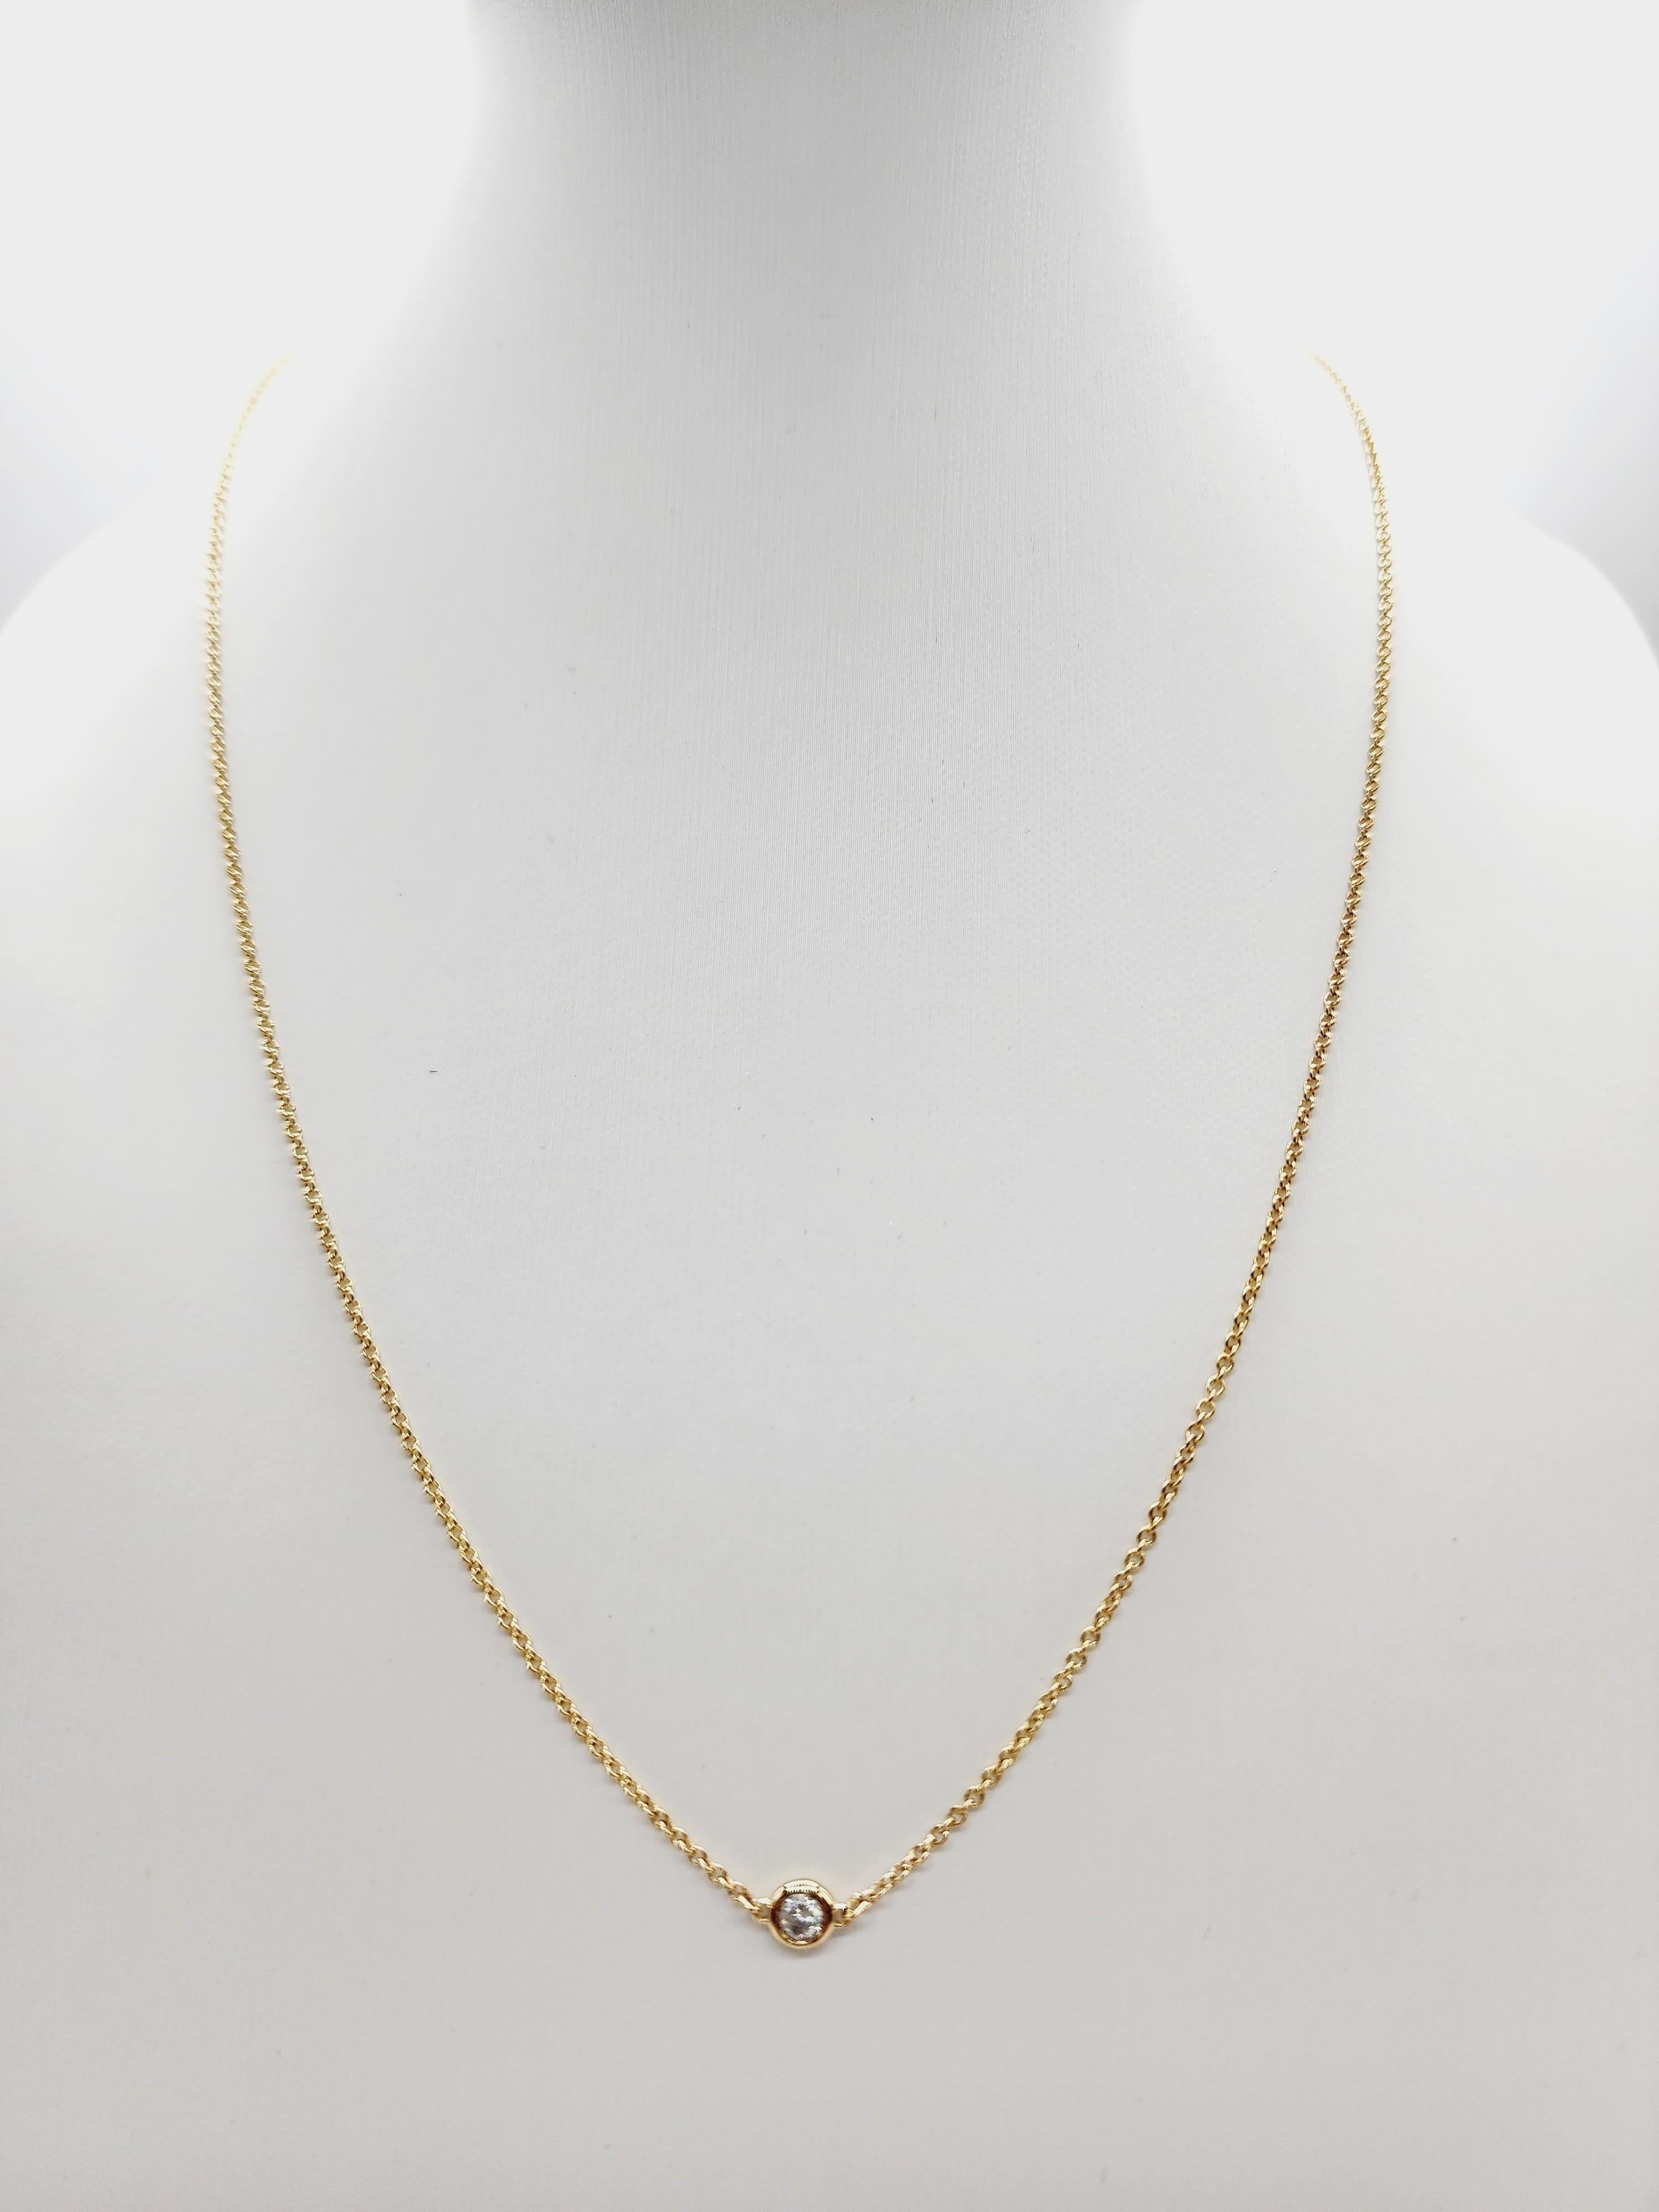 Single Station Diamond by the yard necklace set in Italian made 14K yellow gold. 
Total weight is 0.13 carats. Beautiful shiny natural diamond. 
Total length is 18 inch. Average Color/Clarity I-I